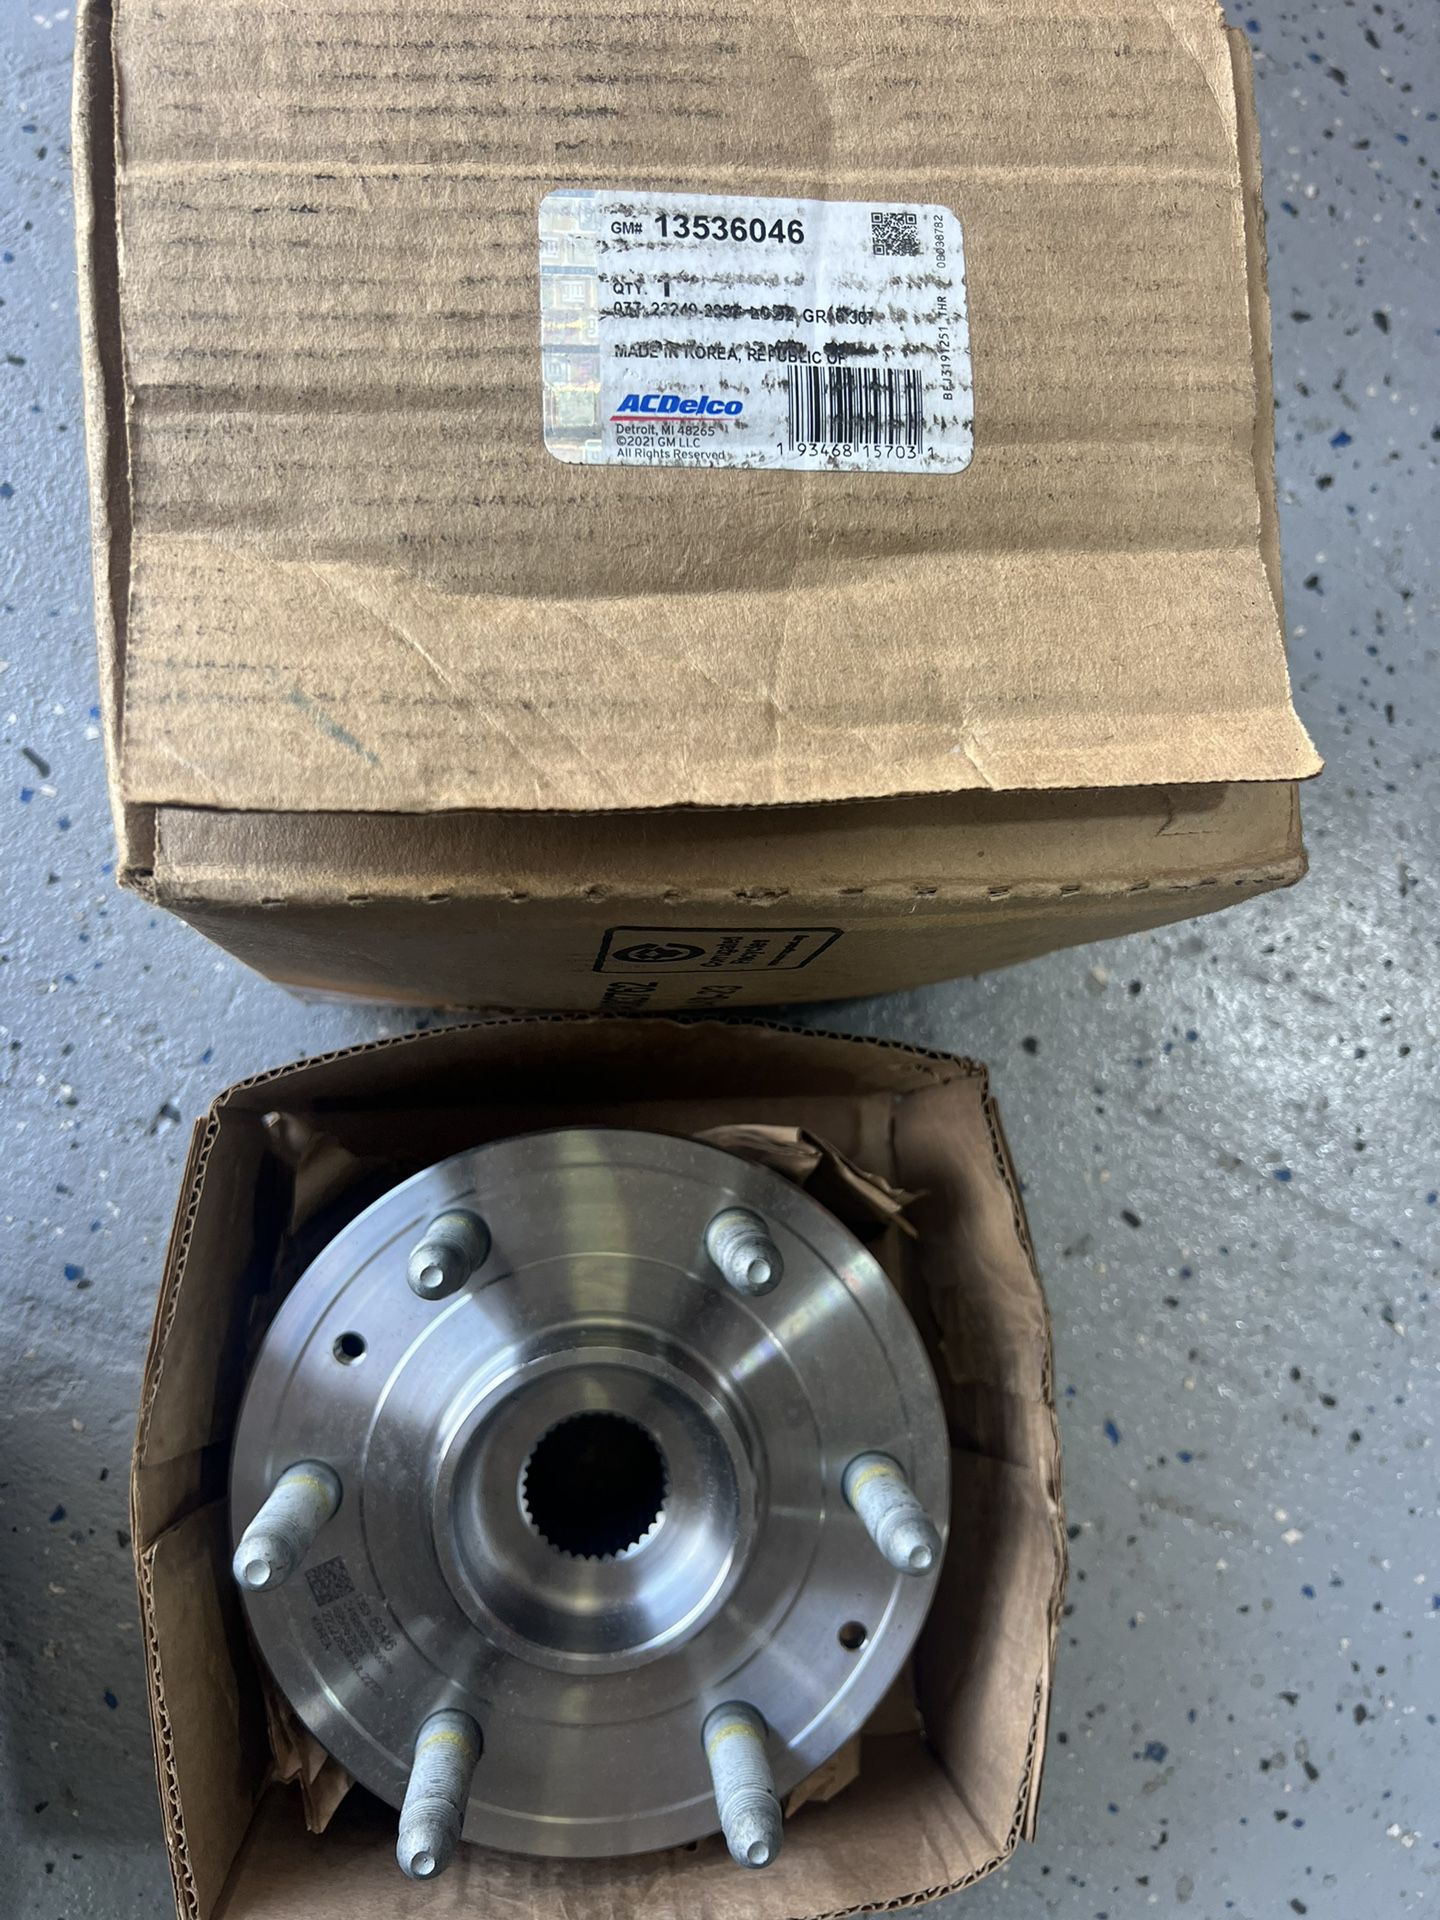 Wheel Hub-4WD Front ACDelco GM Original Equipment 1(contact info removed) GMC SIERRA 1500